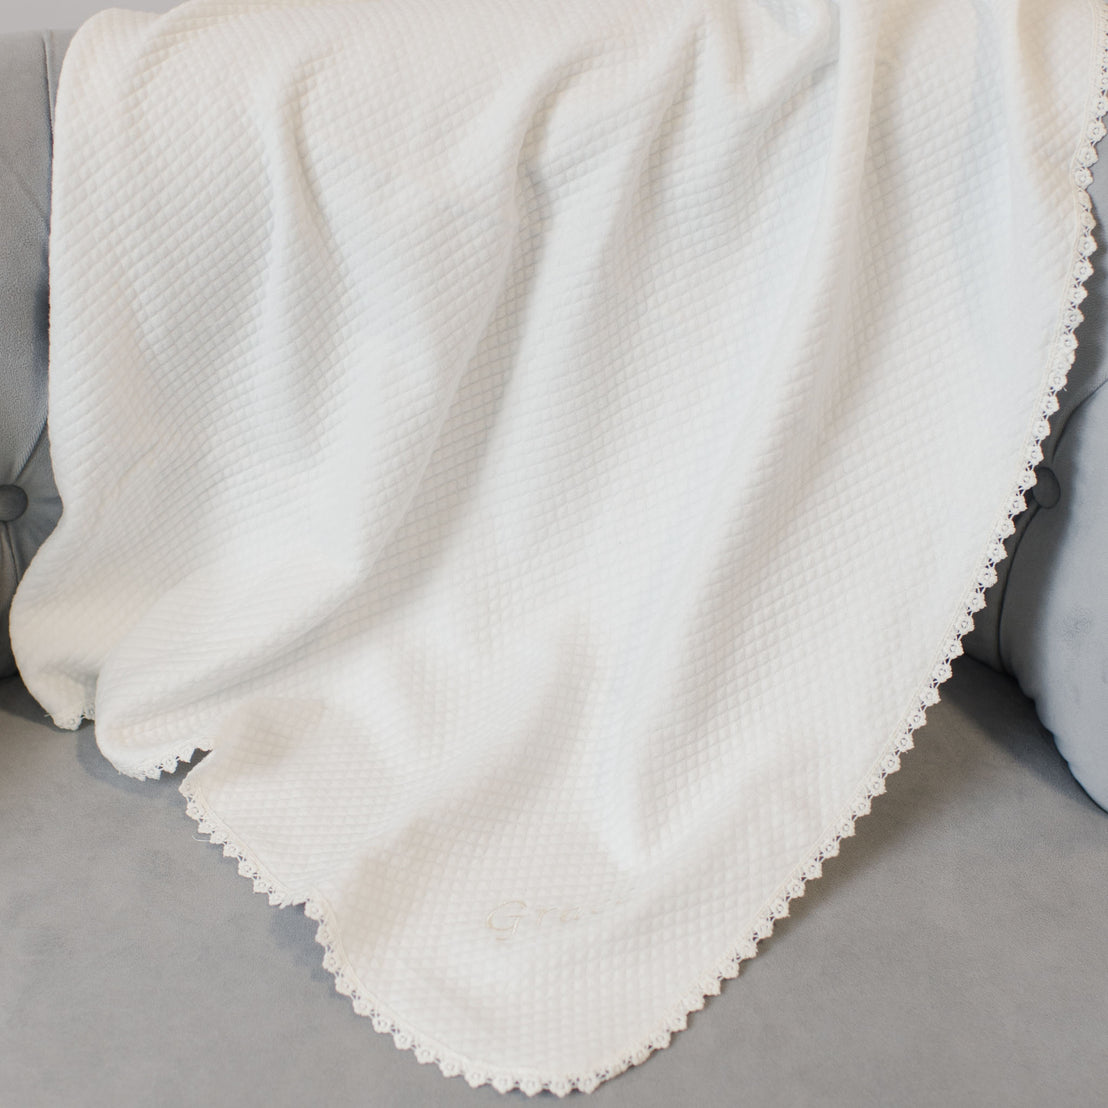 A soft white waffle weave Grace Personalized Blanket with a scalloped edge draped over a gray couch.